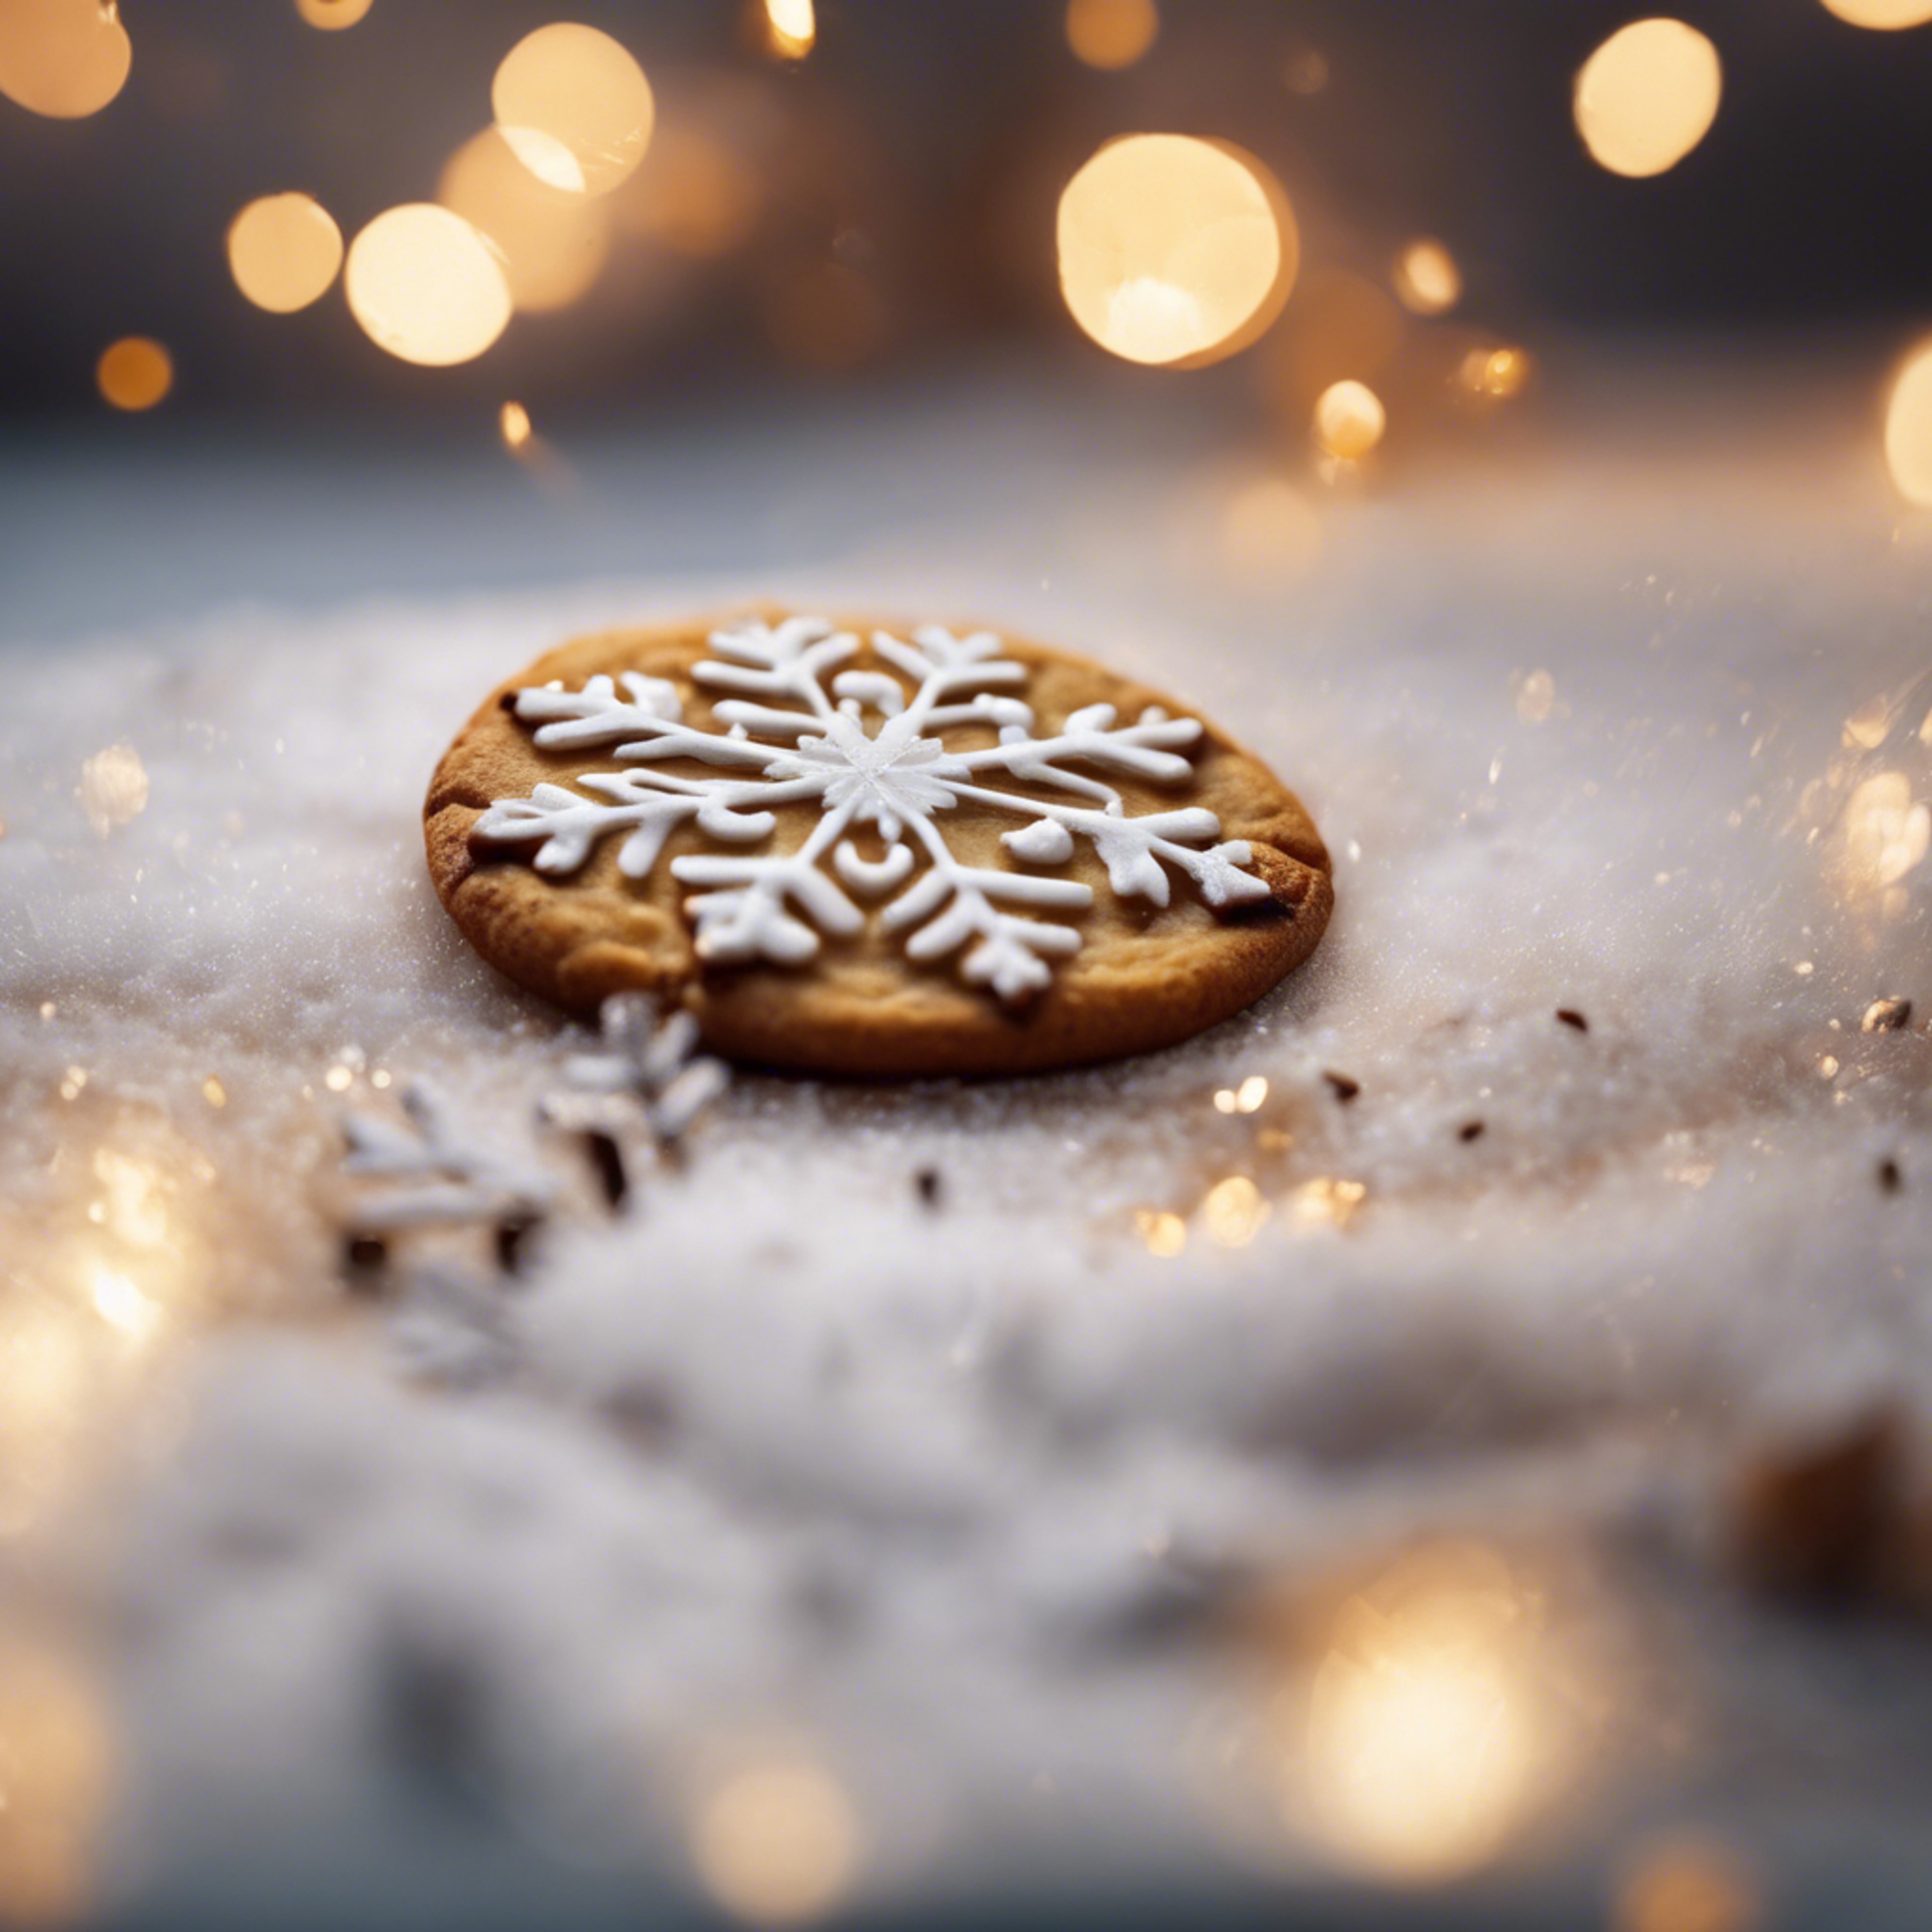 A freshly baked warm cookie with a snowflake landing on it. ផ្ទាំង​រូបភាព[89e6bcadefb047bd9a34]